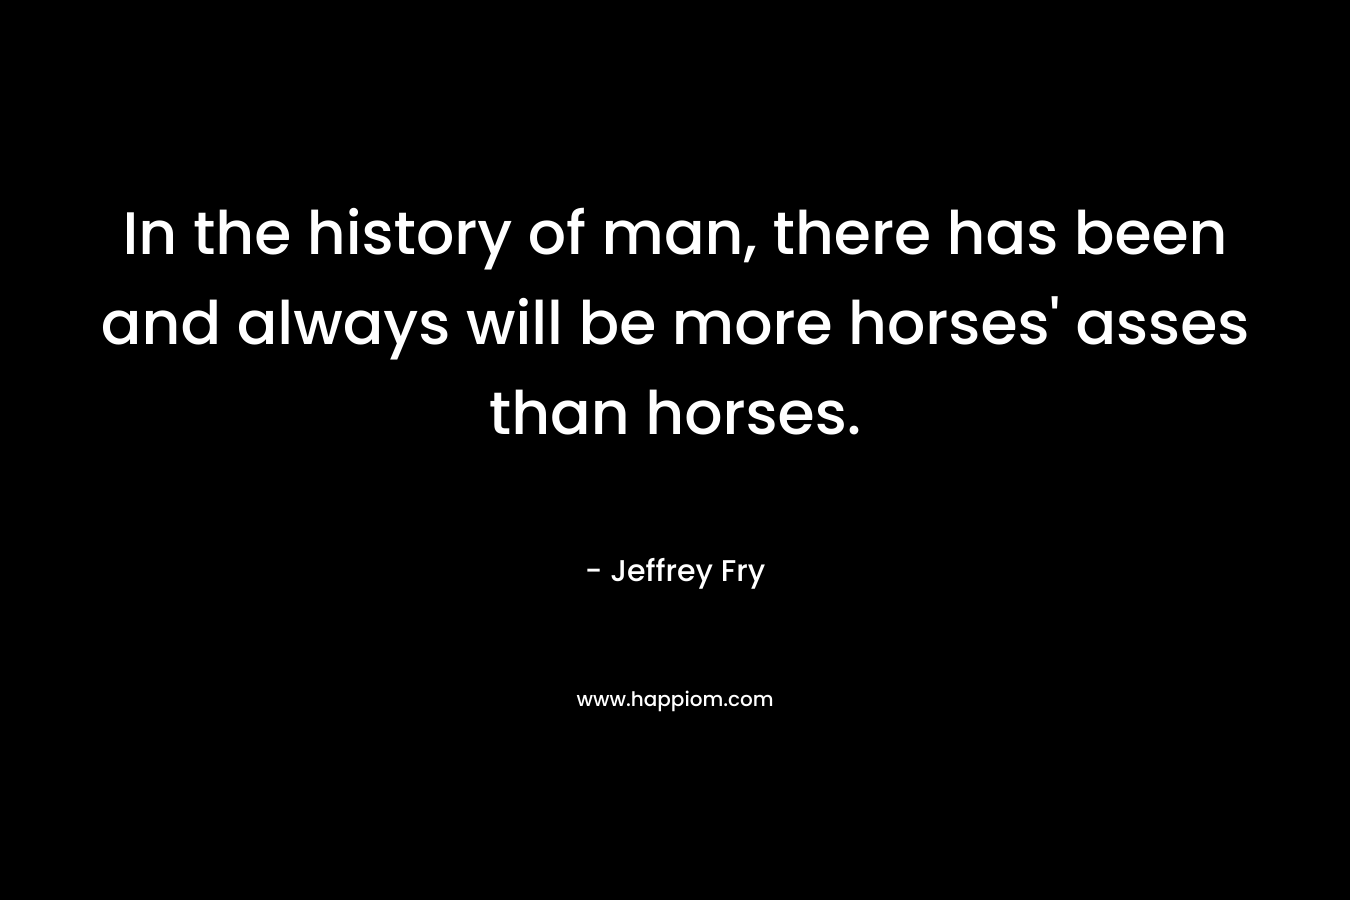 In the history of man, there has been and always will be more horses' asses than horses.